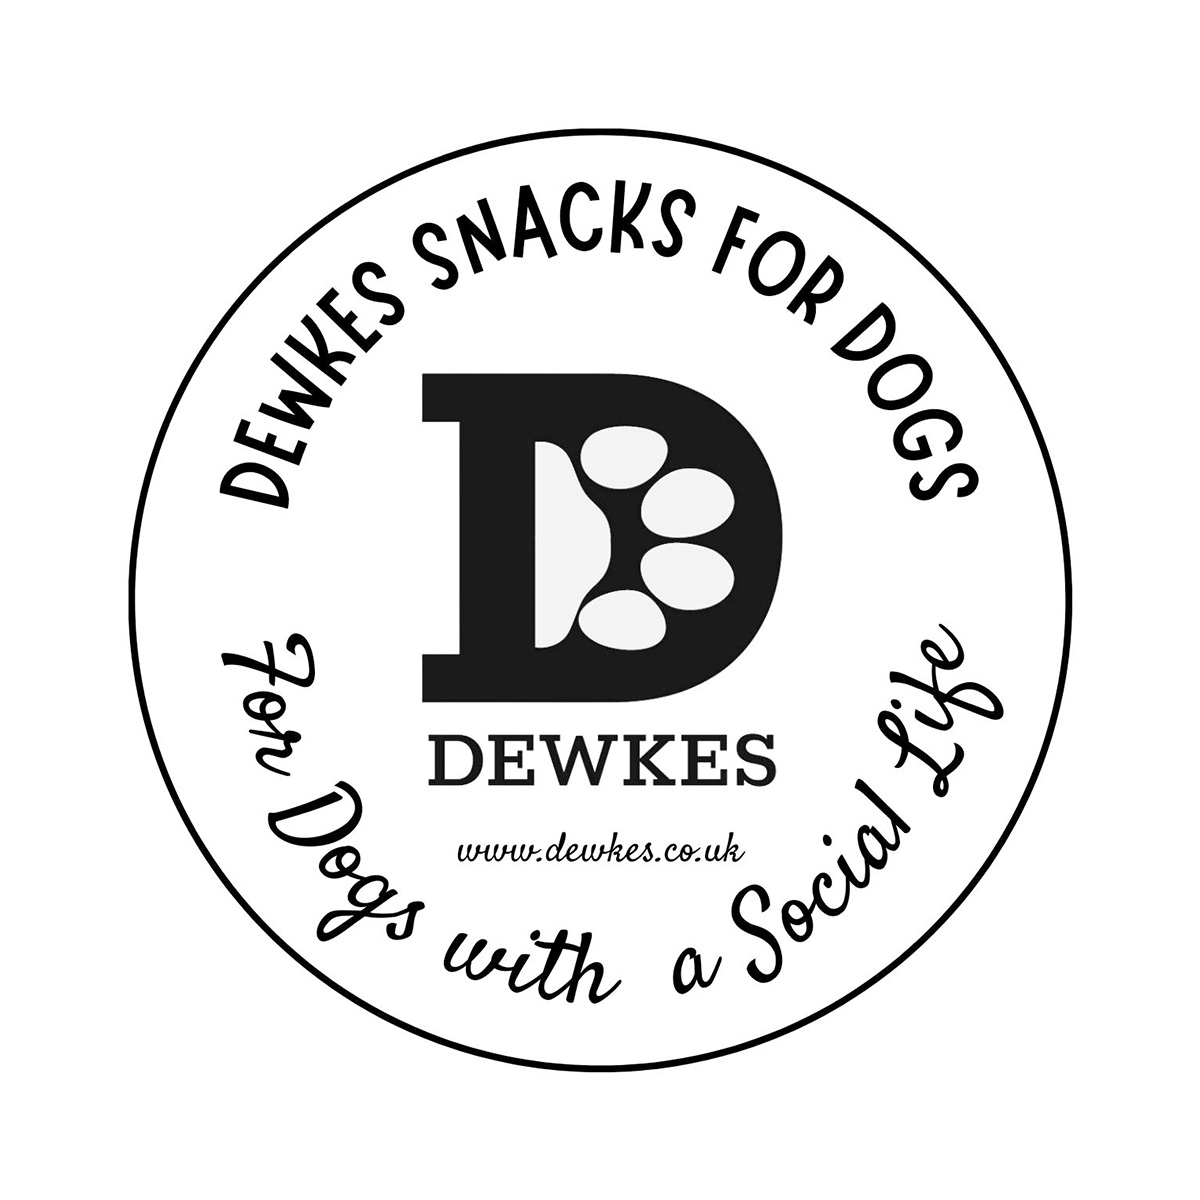 Dewkes Snacks for Dogs